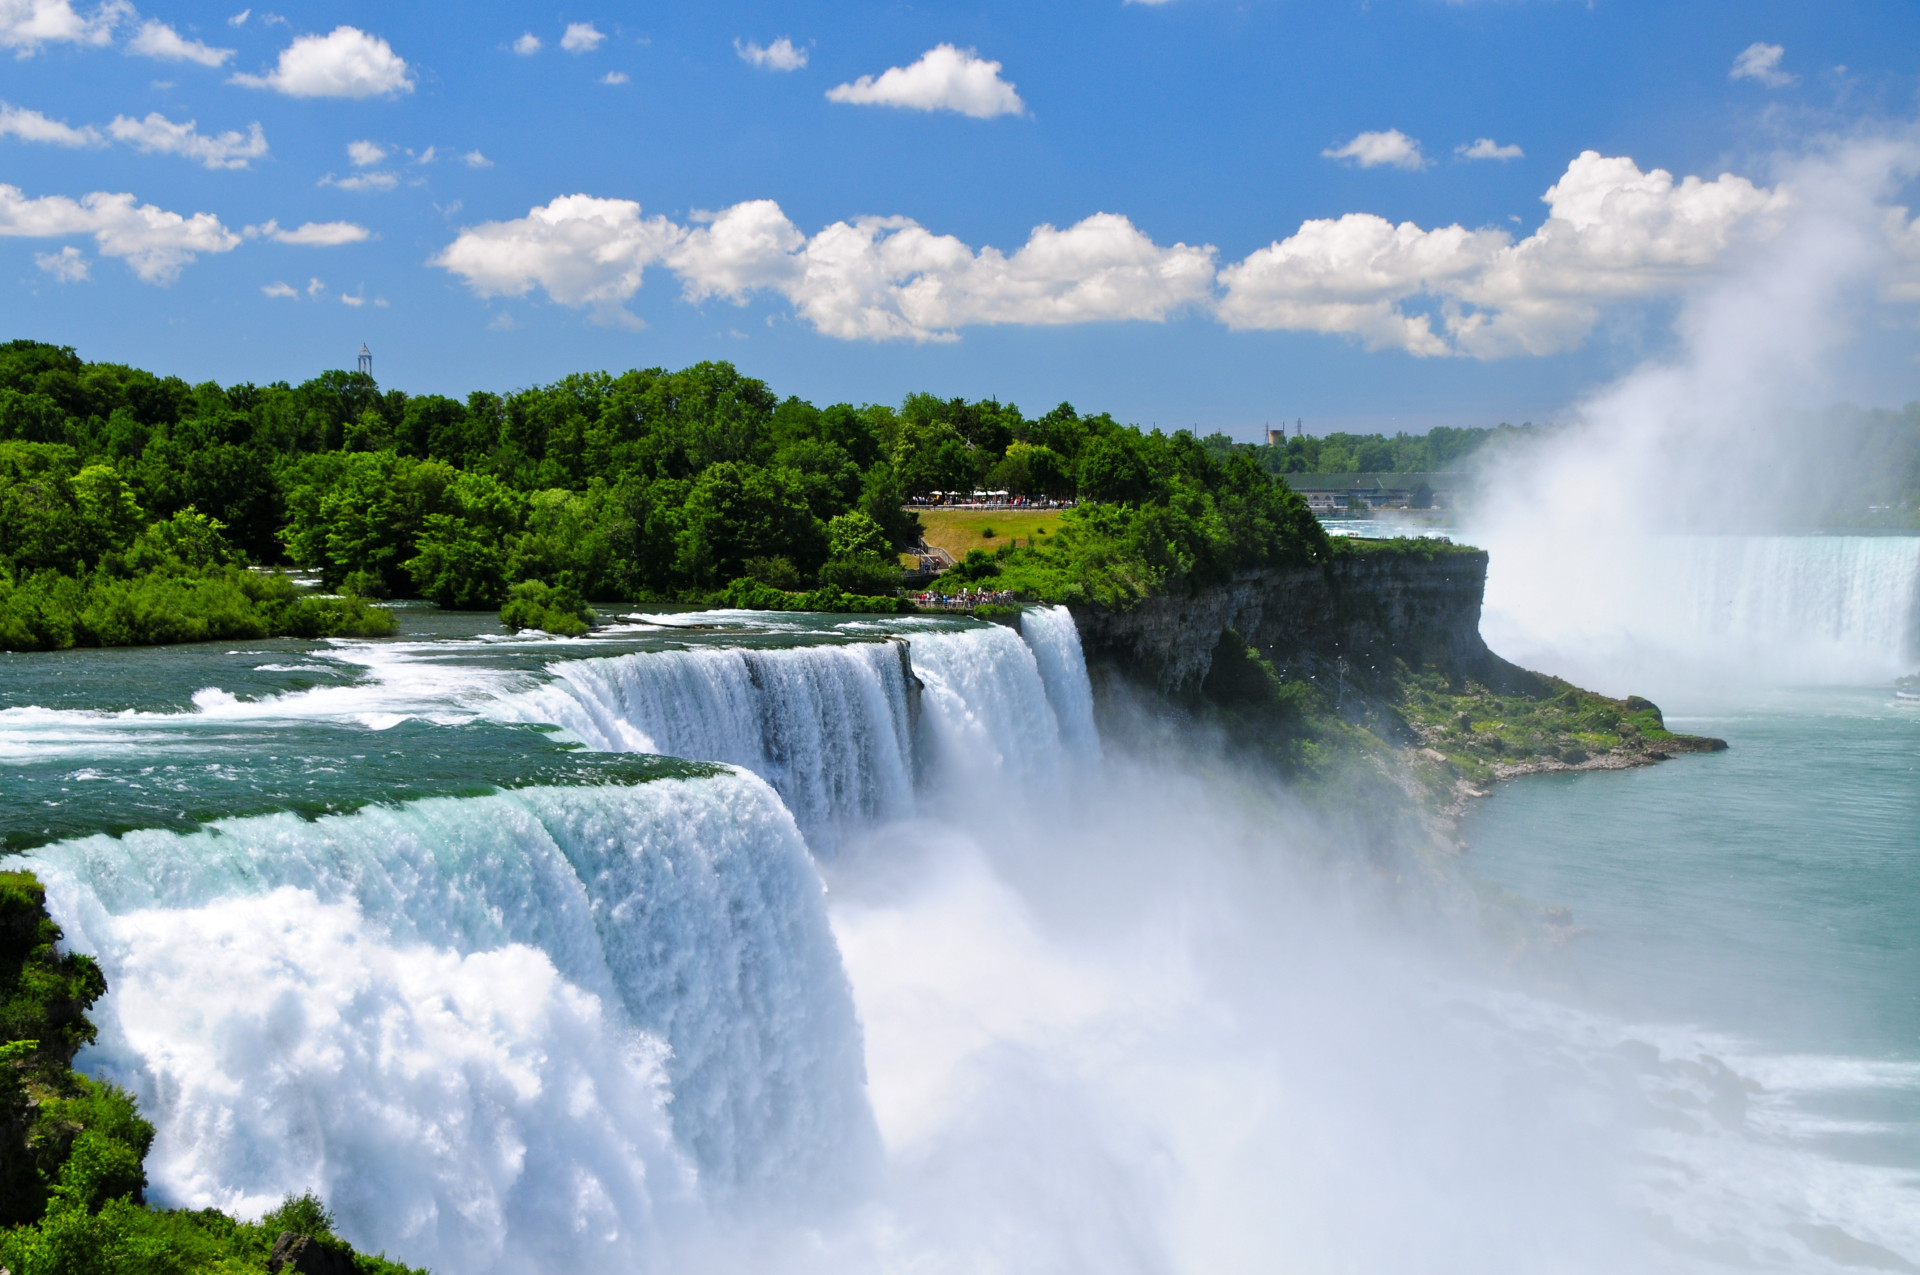 The US state of New York has much to offer this year. Indeed, 2024 will see the 100-year anniversary of Niagara Falls, the oldest state park in the entire United States.<p><a href="https://www.msn.com/en-us/community/channel/vid-7xx8mnucu55yw63we9va2gwr7uihbxwc68fxqp25x6tg4ftibpra?cvid=94631541bc0f4f89bfd59158d696ad7e">Follow us and access great exclusive content every day</a></p>